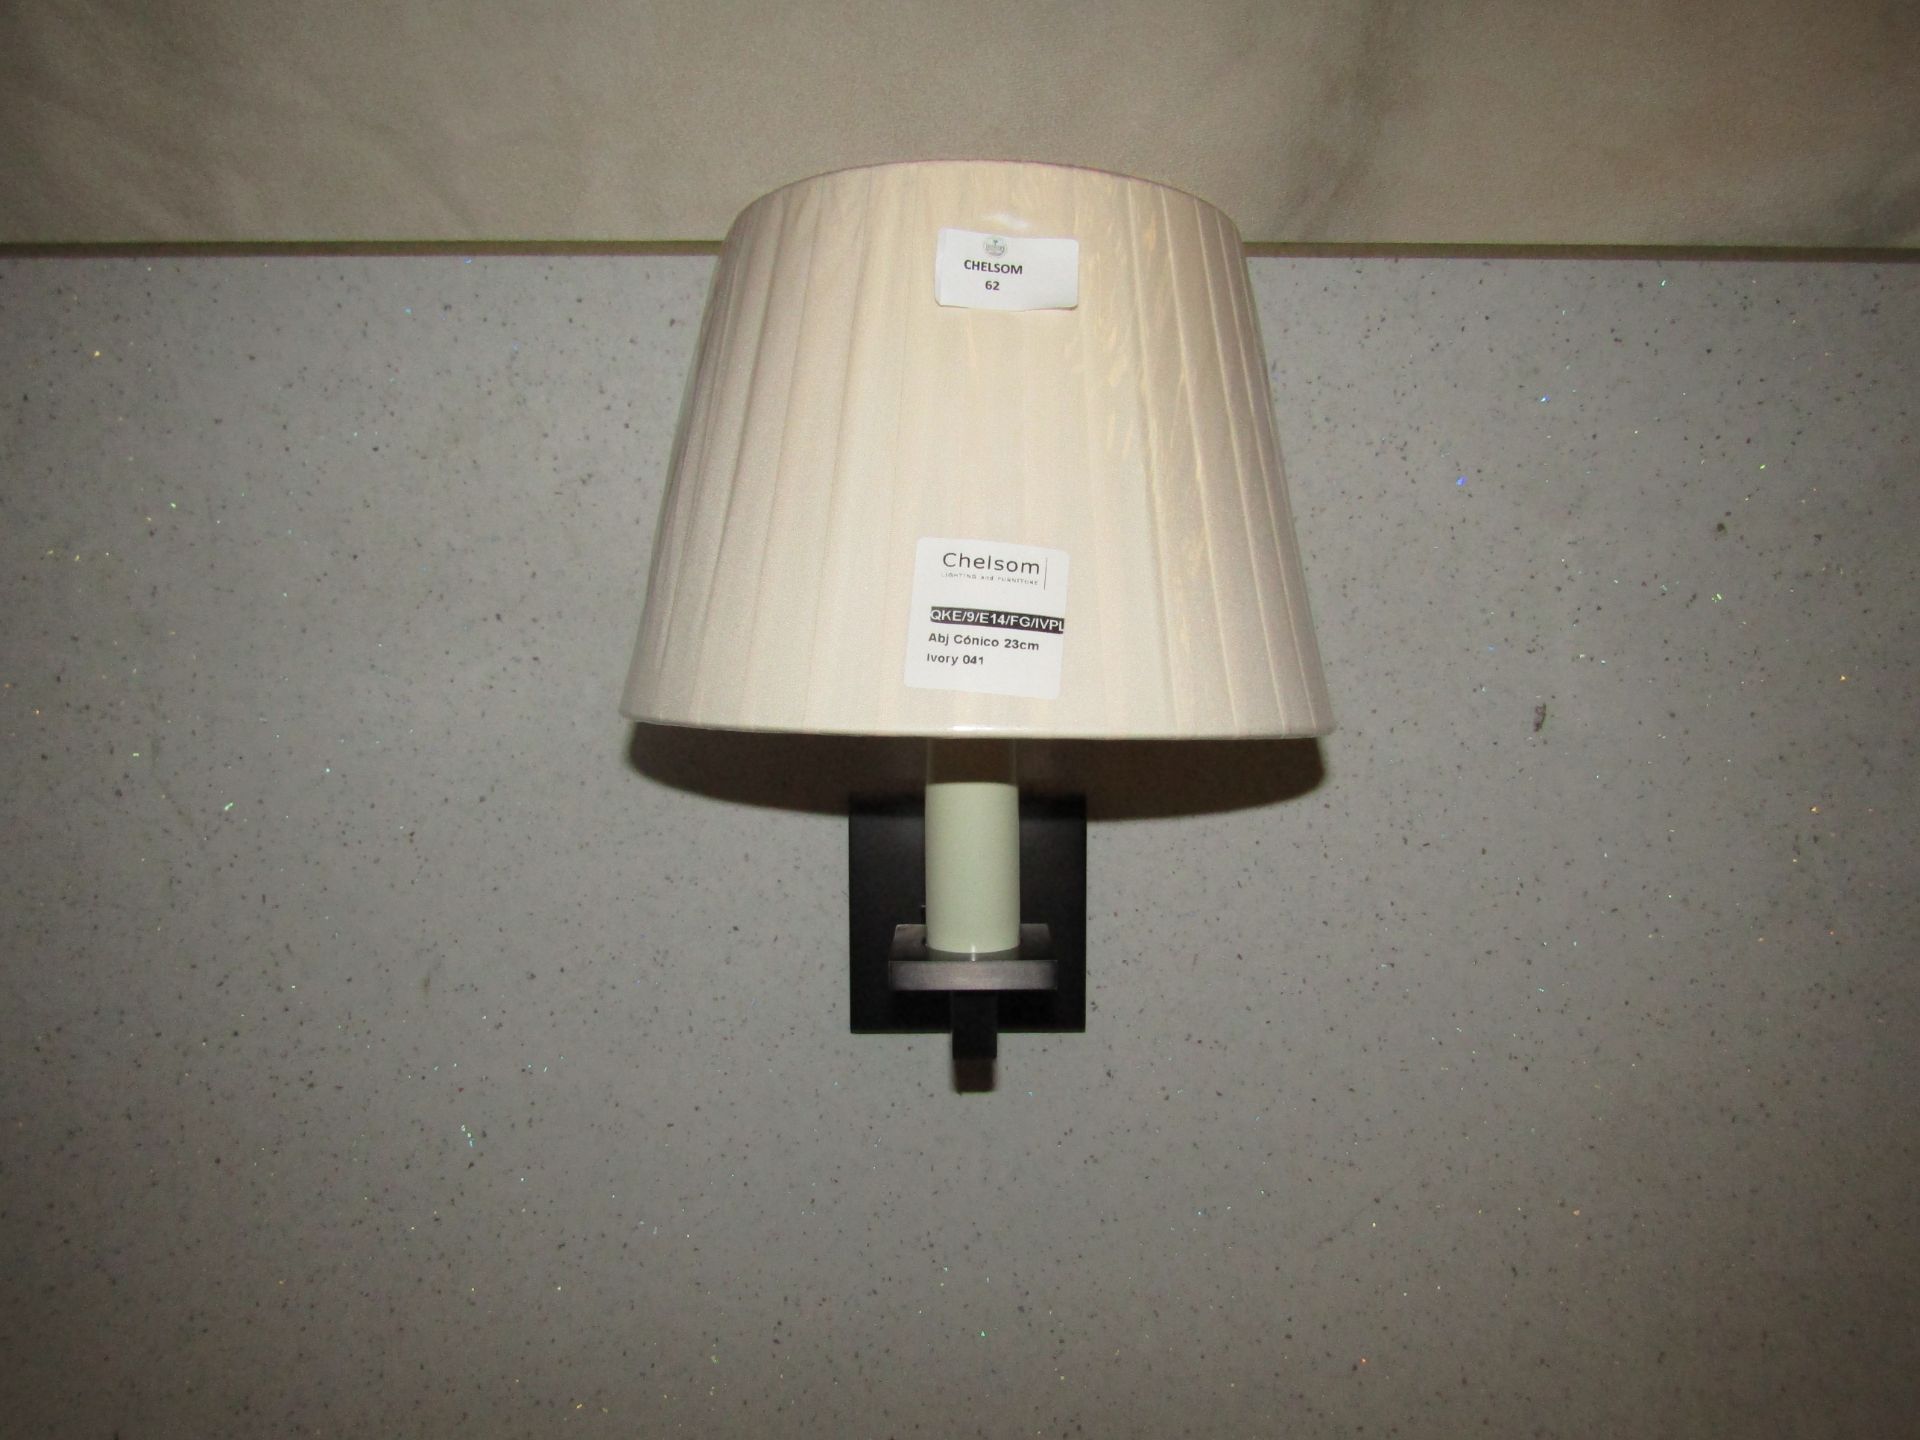 Chelsom - Black Wall Light With Ivory 23cm Shade - New.